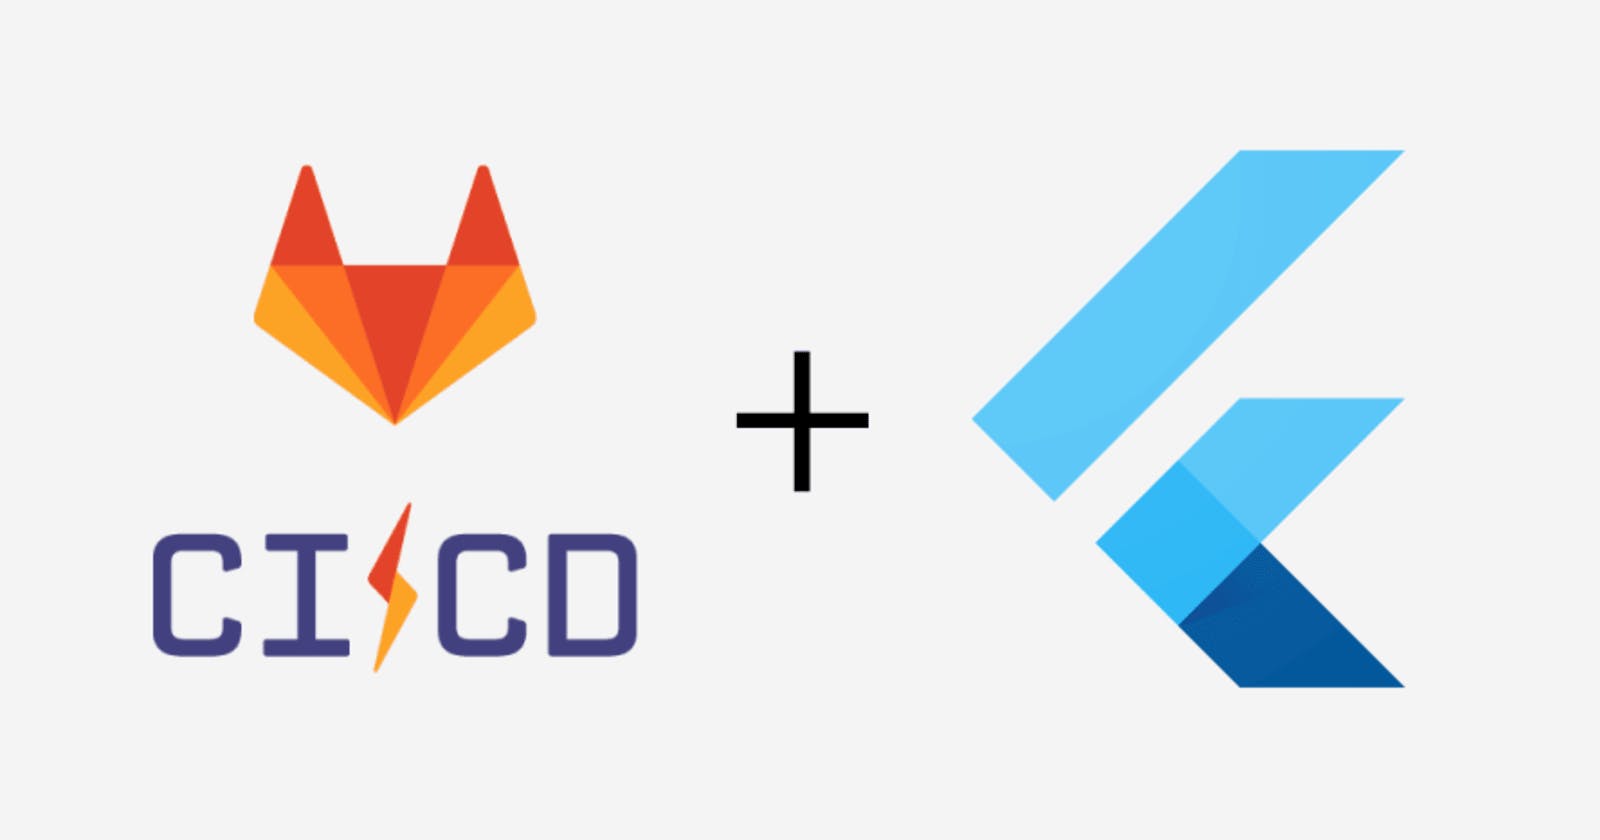 How to build and deploy Flutter apps with Gitlab pipeline on Playstore and Appstore